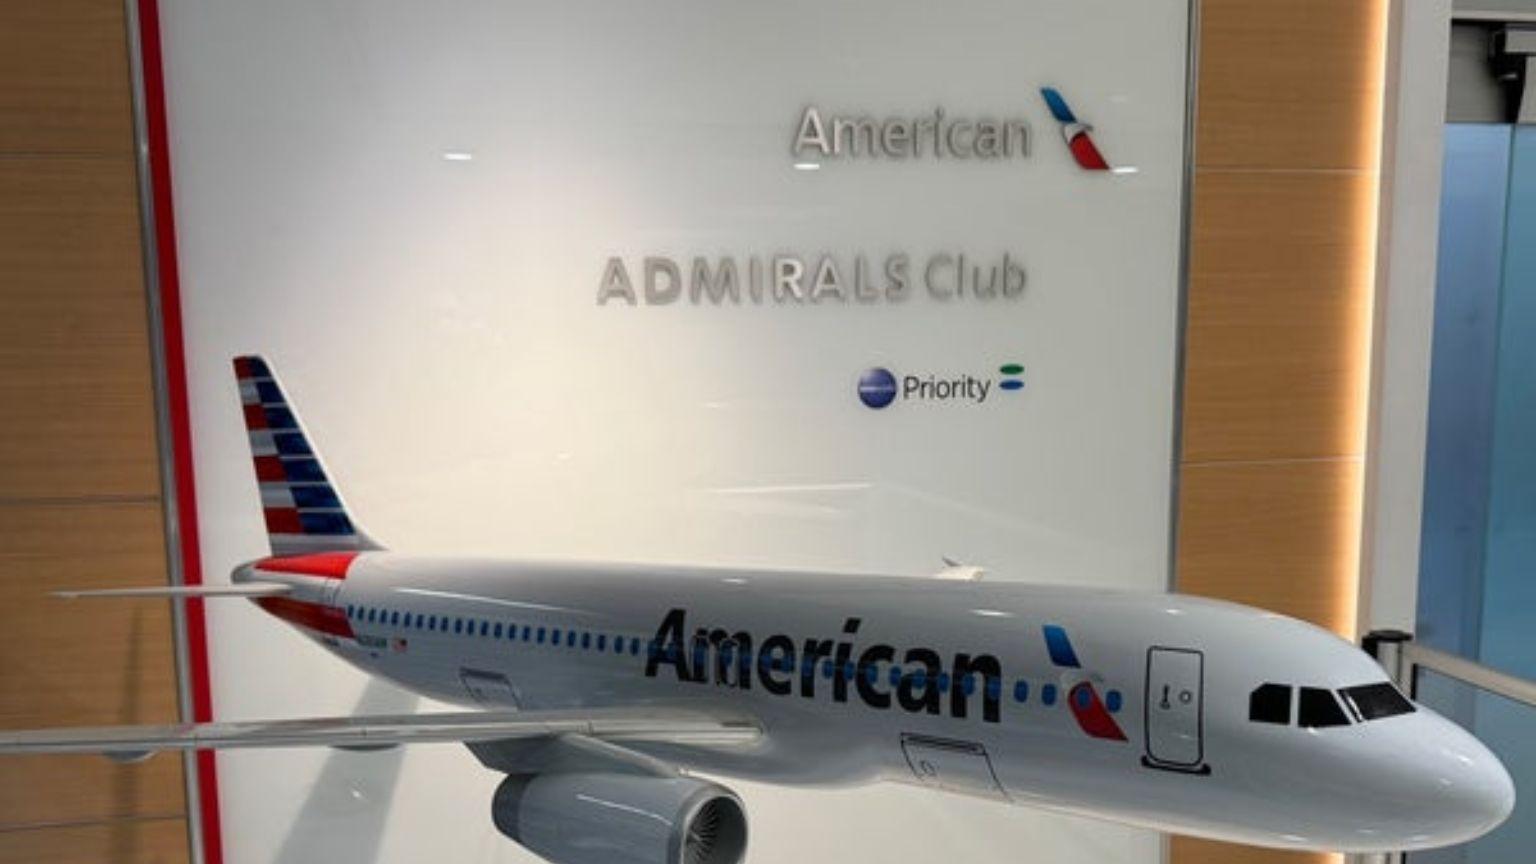 American Airlines Admirals Club Lounge, Terminal 4 (Above Gates A7 & A9)